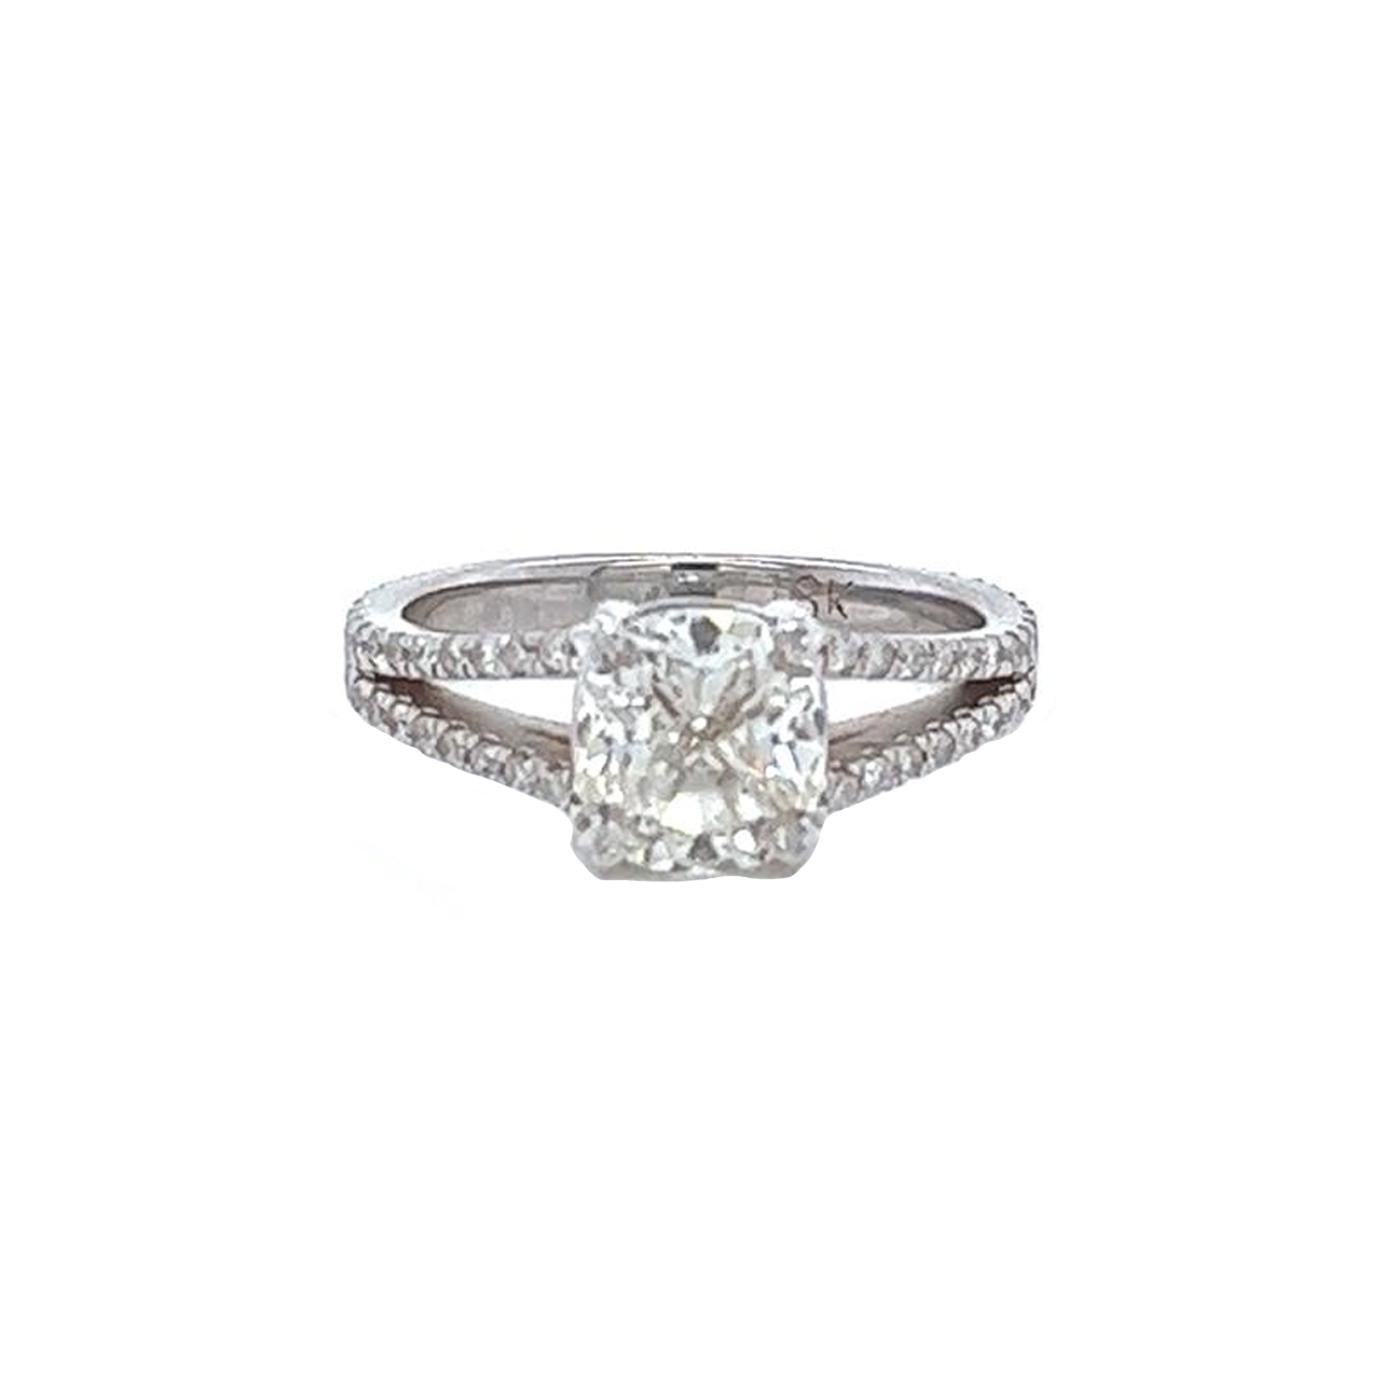 Modernist Exceptional GIA Graded 2.02 Carat Cushion Diamond Ring Pave Set 14K White Gold For Sale